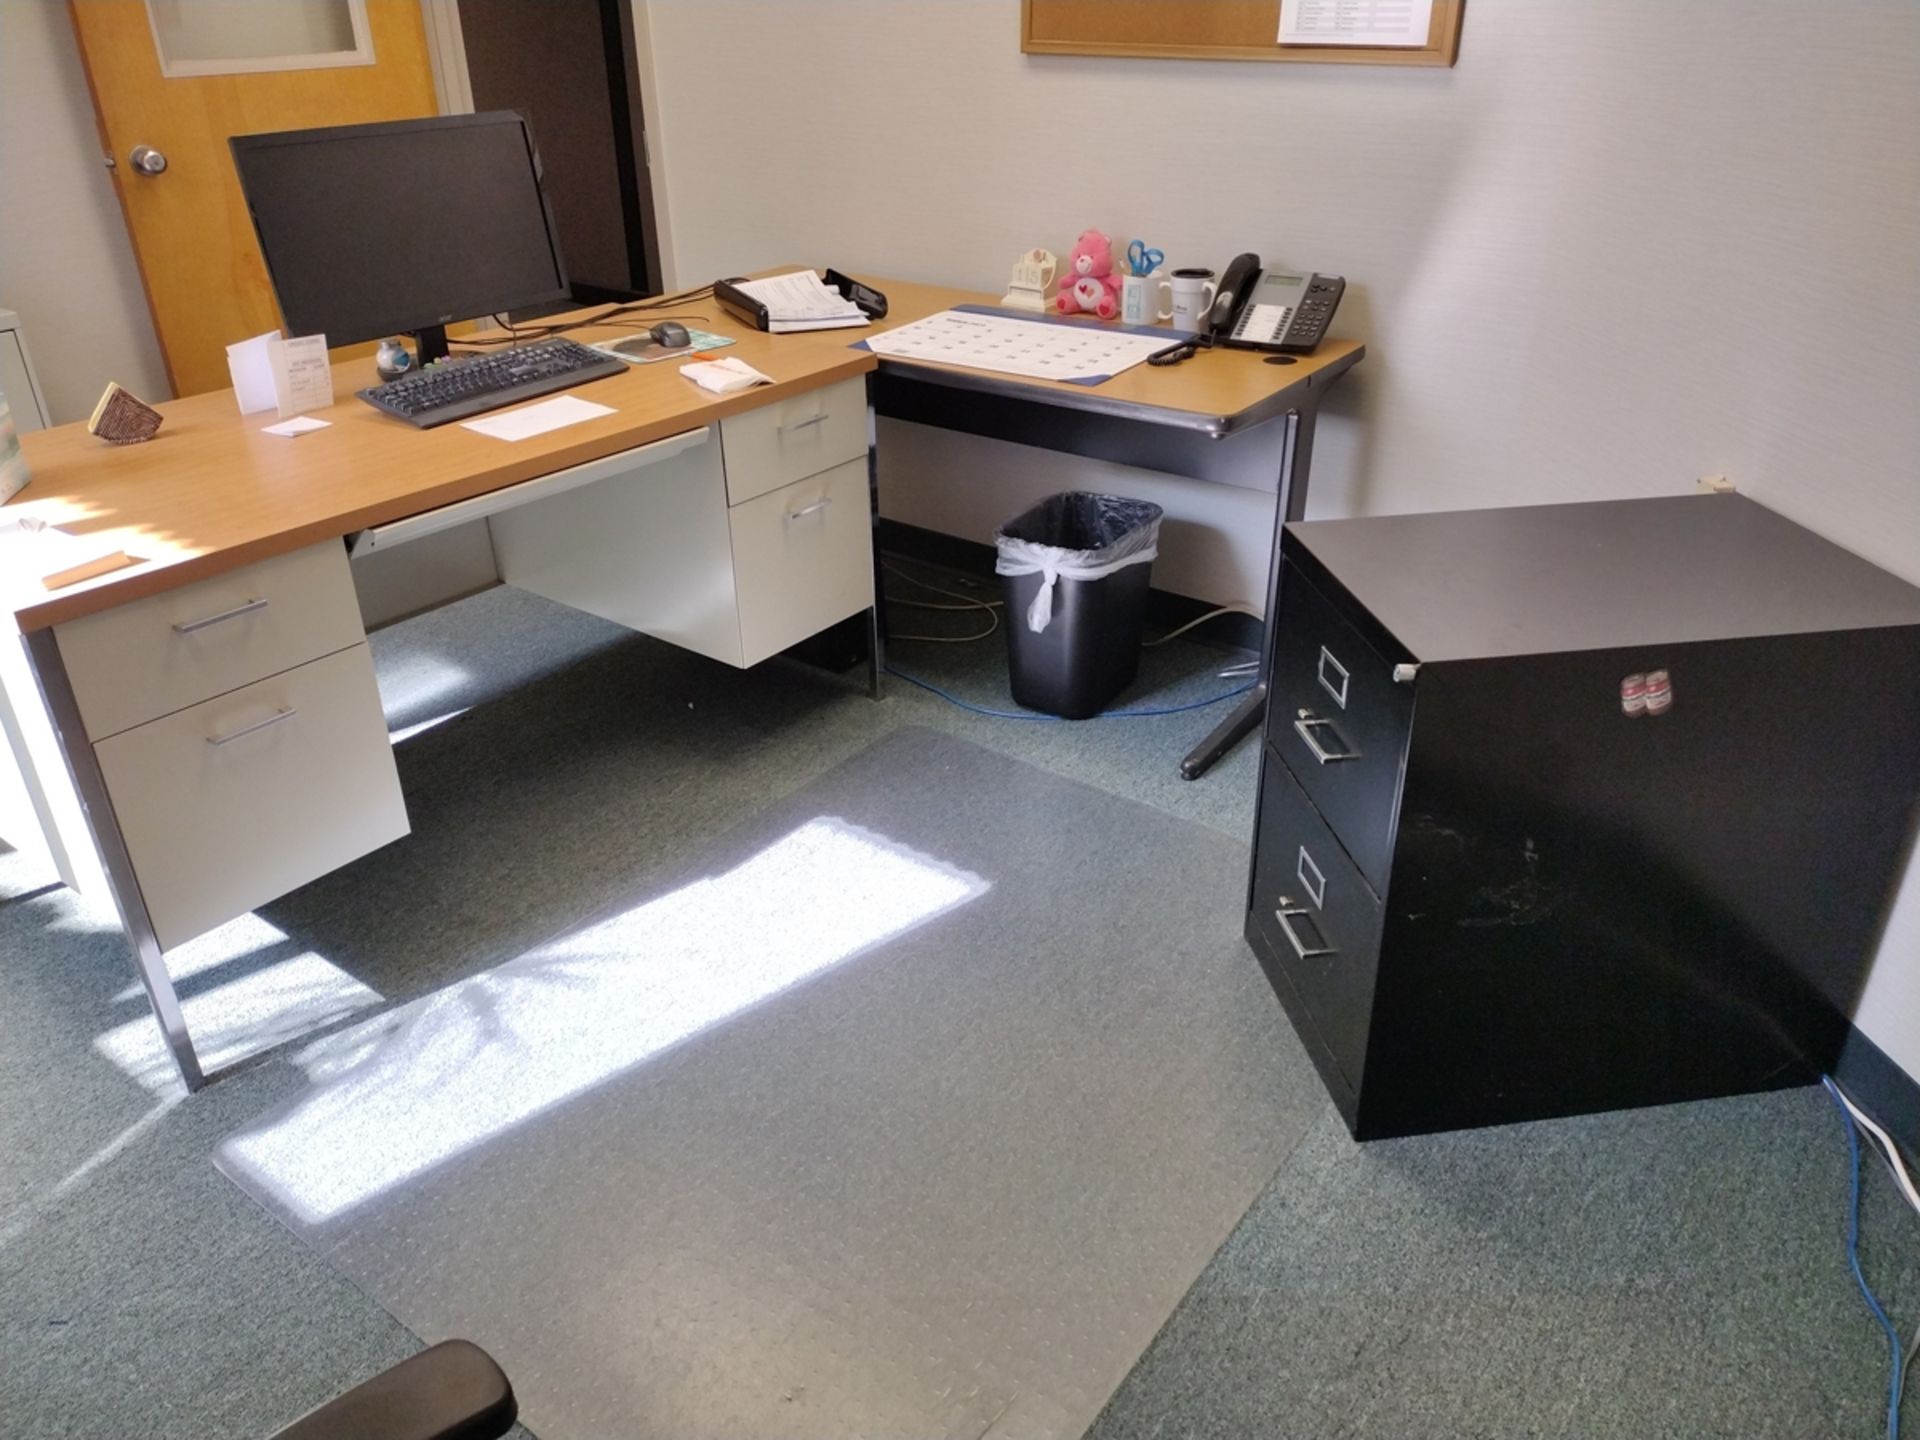 Group of Office Furniture Throughout Rooms - Image 13 of 14